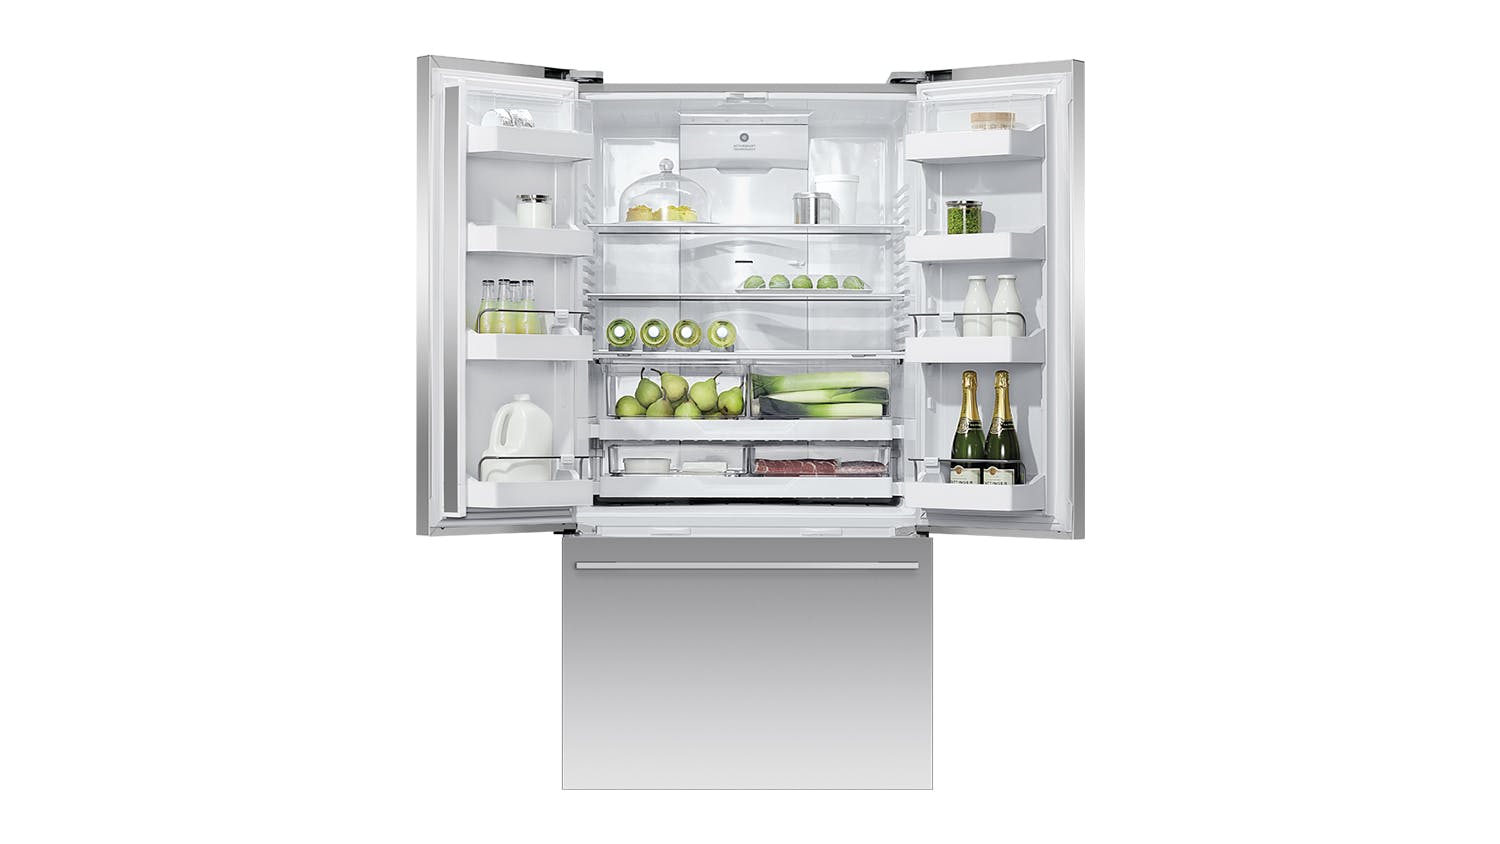 Stylish and practical, the Fisher & Paykel 569L ActiveSmart™ French Door Fridge Freezer is masterfully engineered to help prolong the freshness of your food and groceries. Its 569L total capacity and numerous storage options let you stock up plenty of food items for the entire family. Also, this Fisher & Paykel appliance is backed with many handy functionalities such as Fast Freeze, ActiveSmart technology, humidity-controlled storage bins, and more.